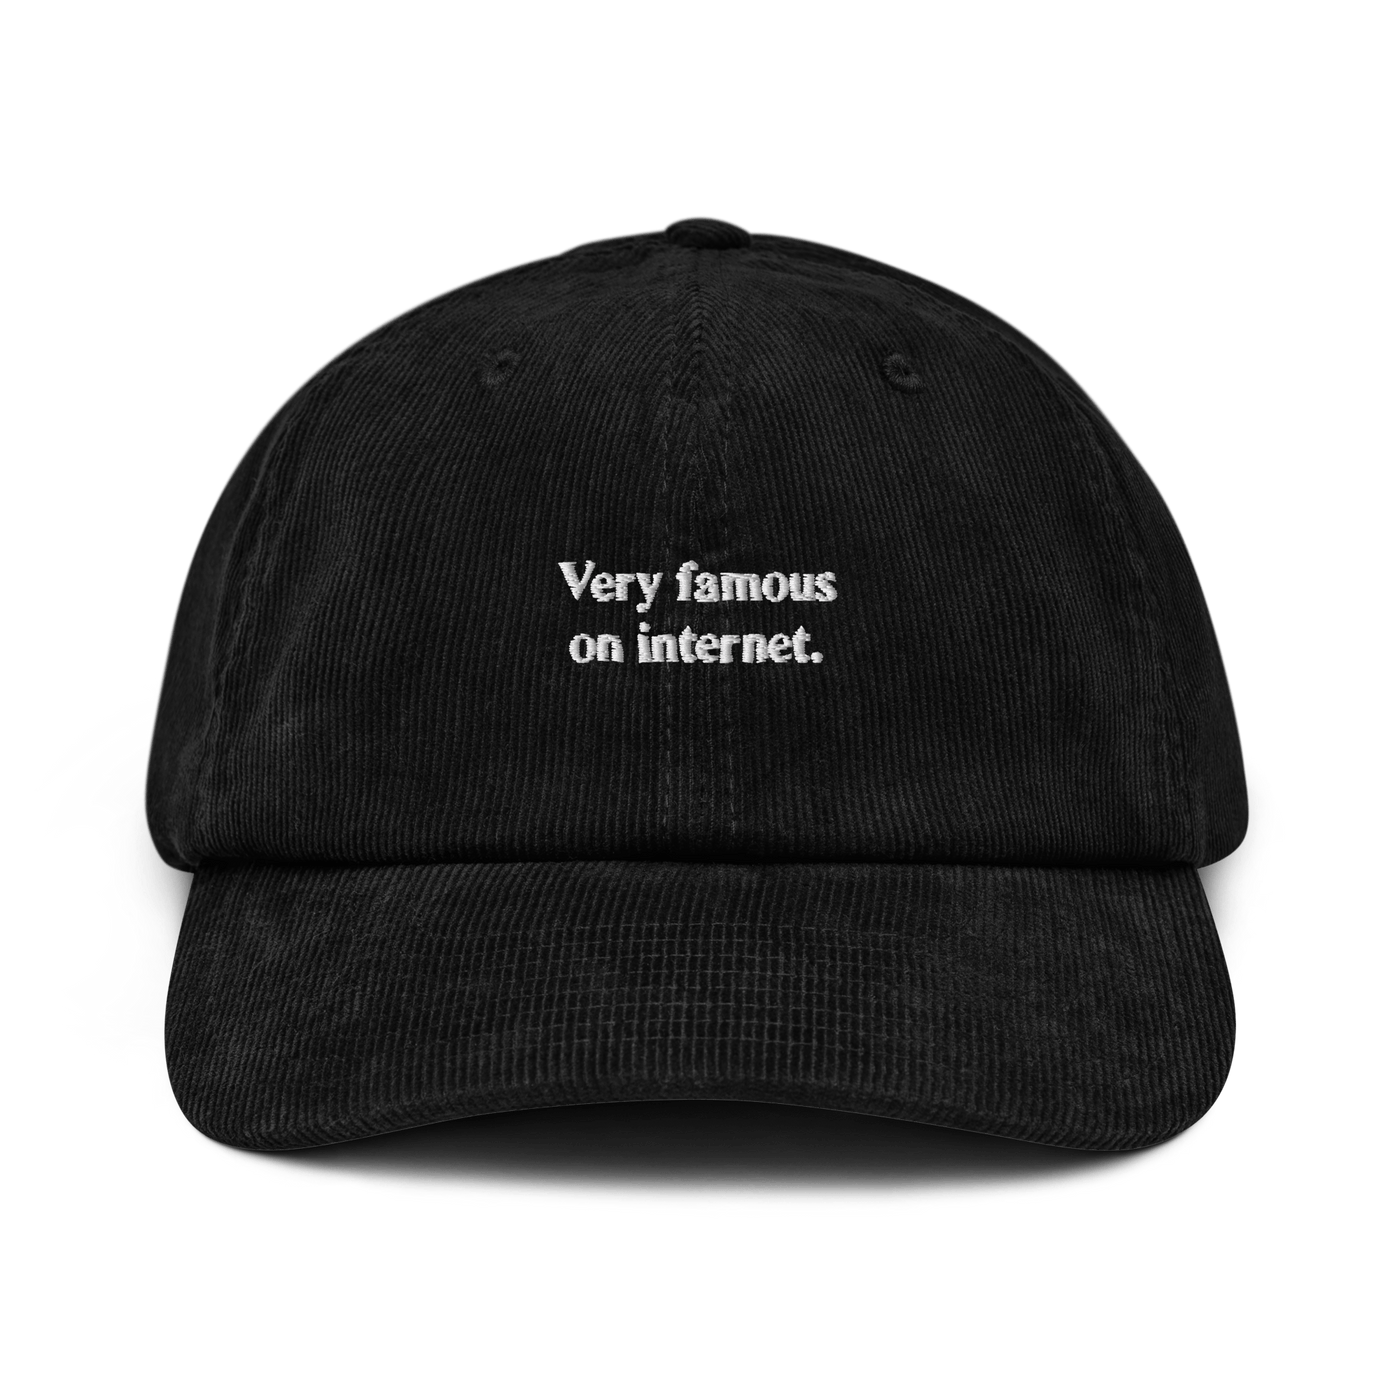 Very famous on internet Corduroy hat - Black - - Just Another Cap Store